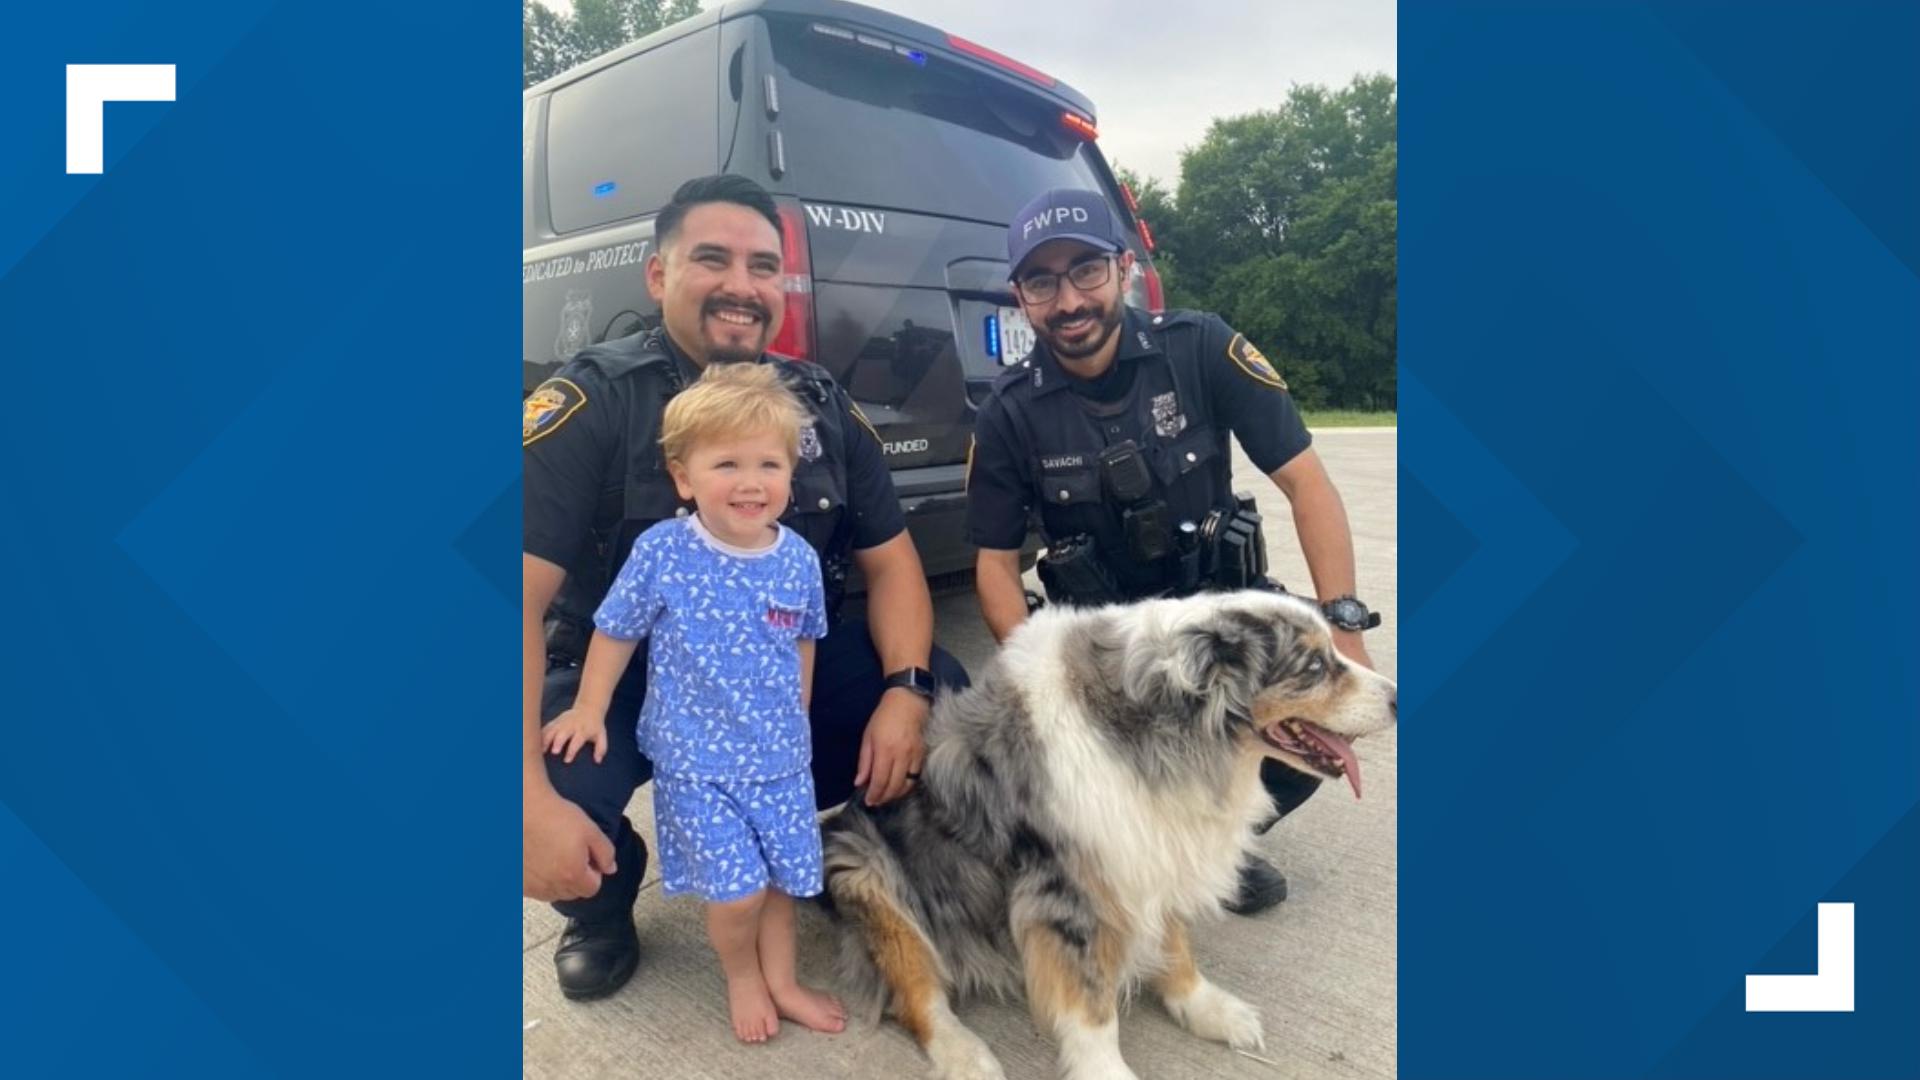 Texas boy reunites with officers who saved him from drowning | 11alive.com